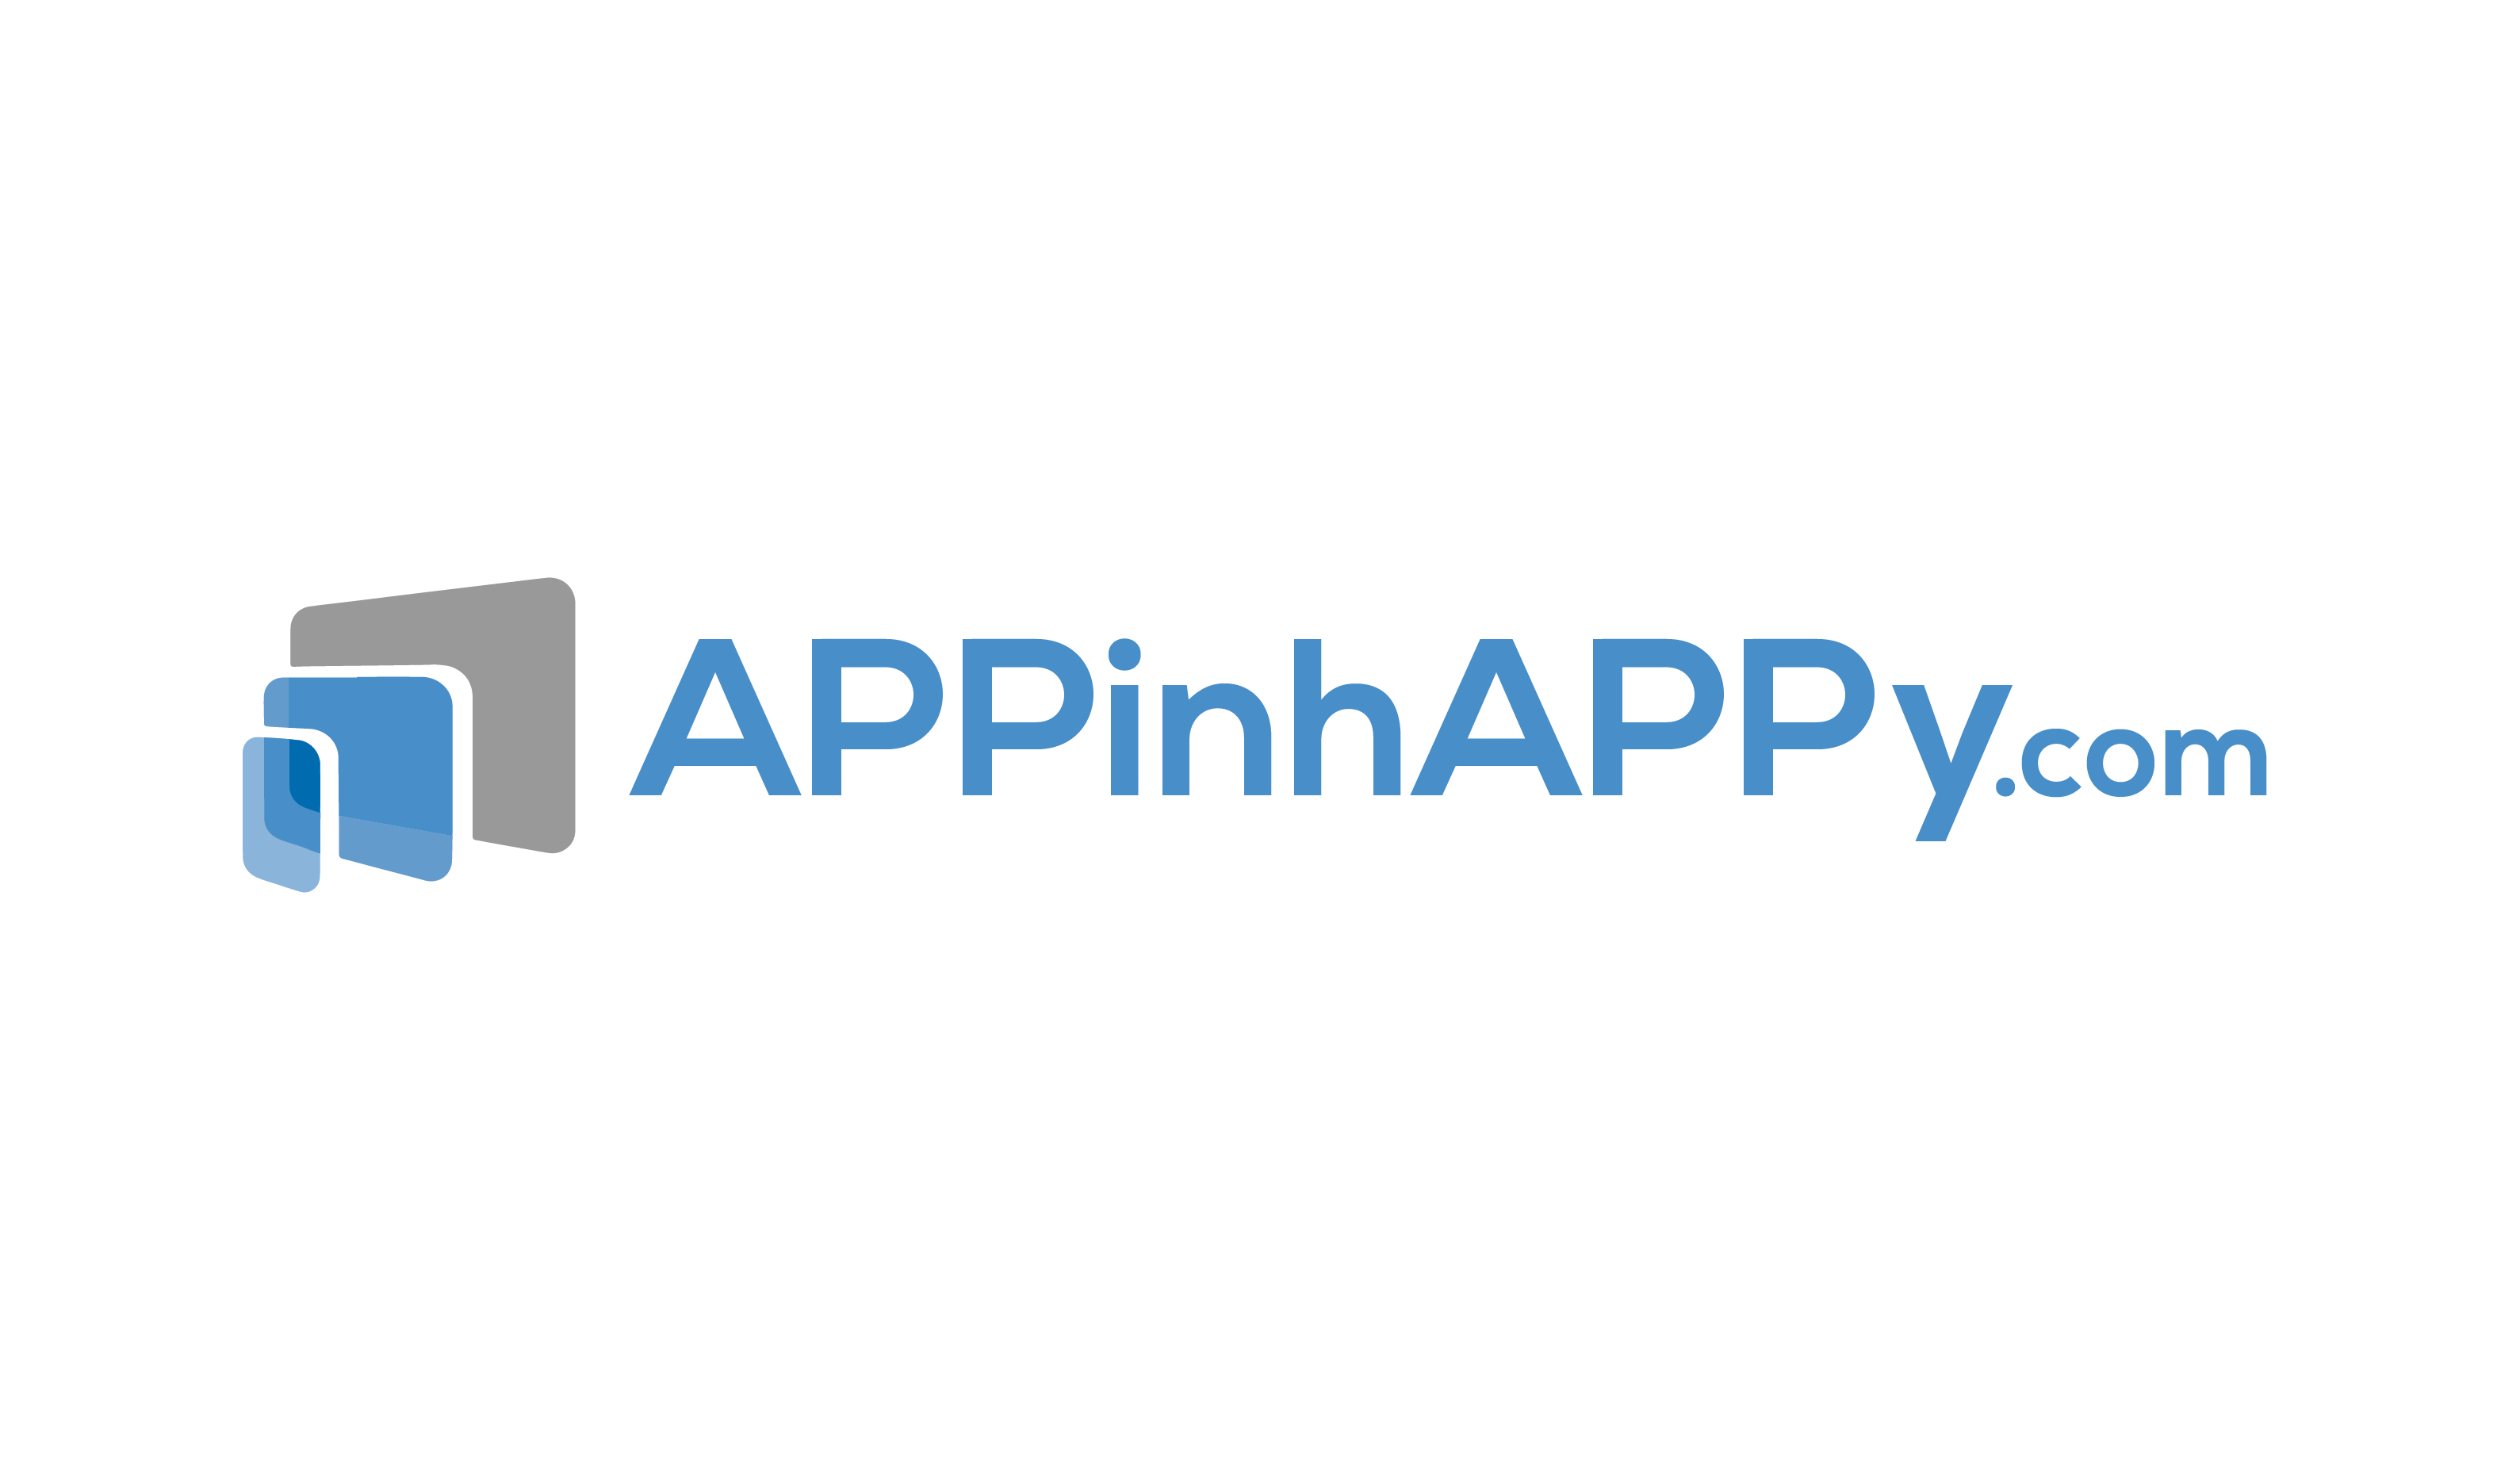 APPinhAPPy'